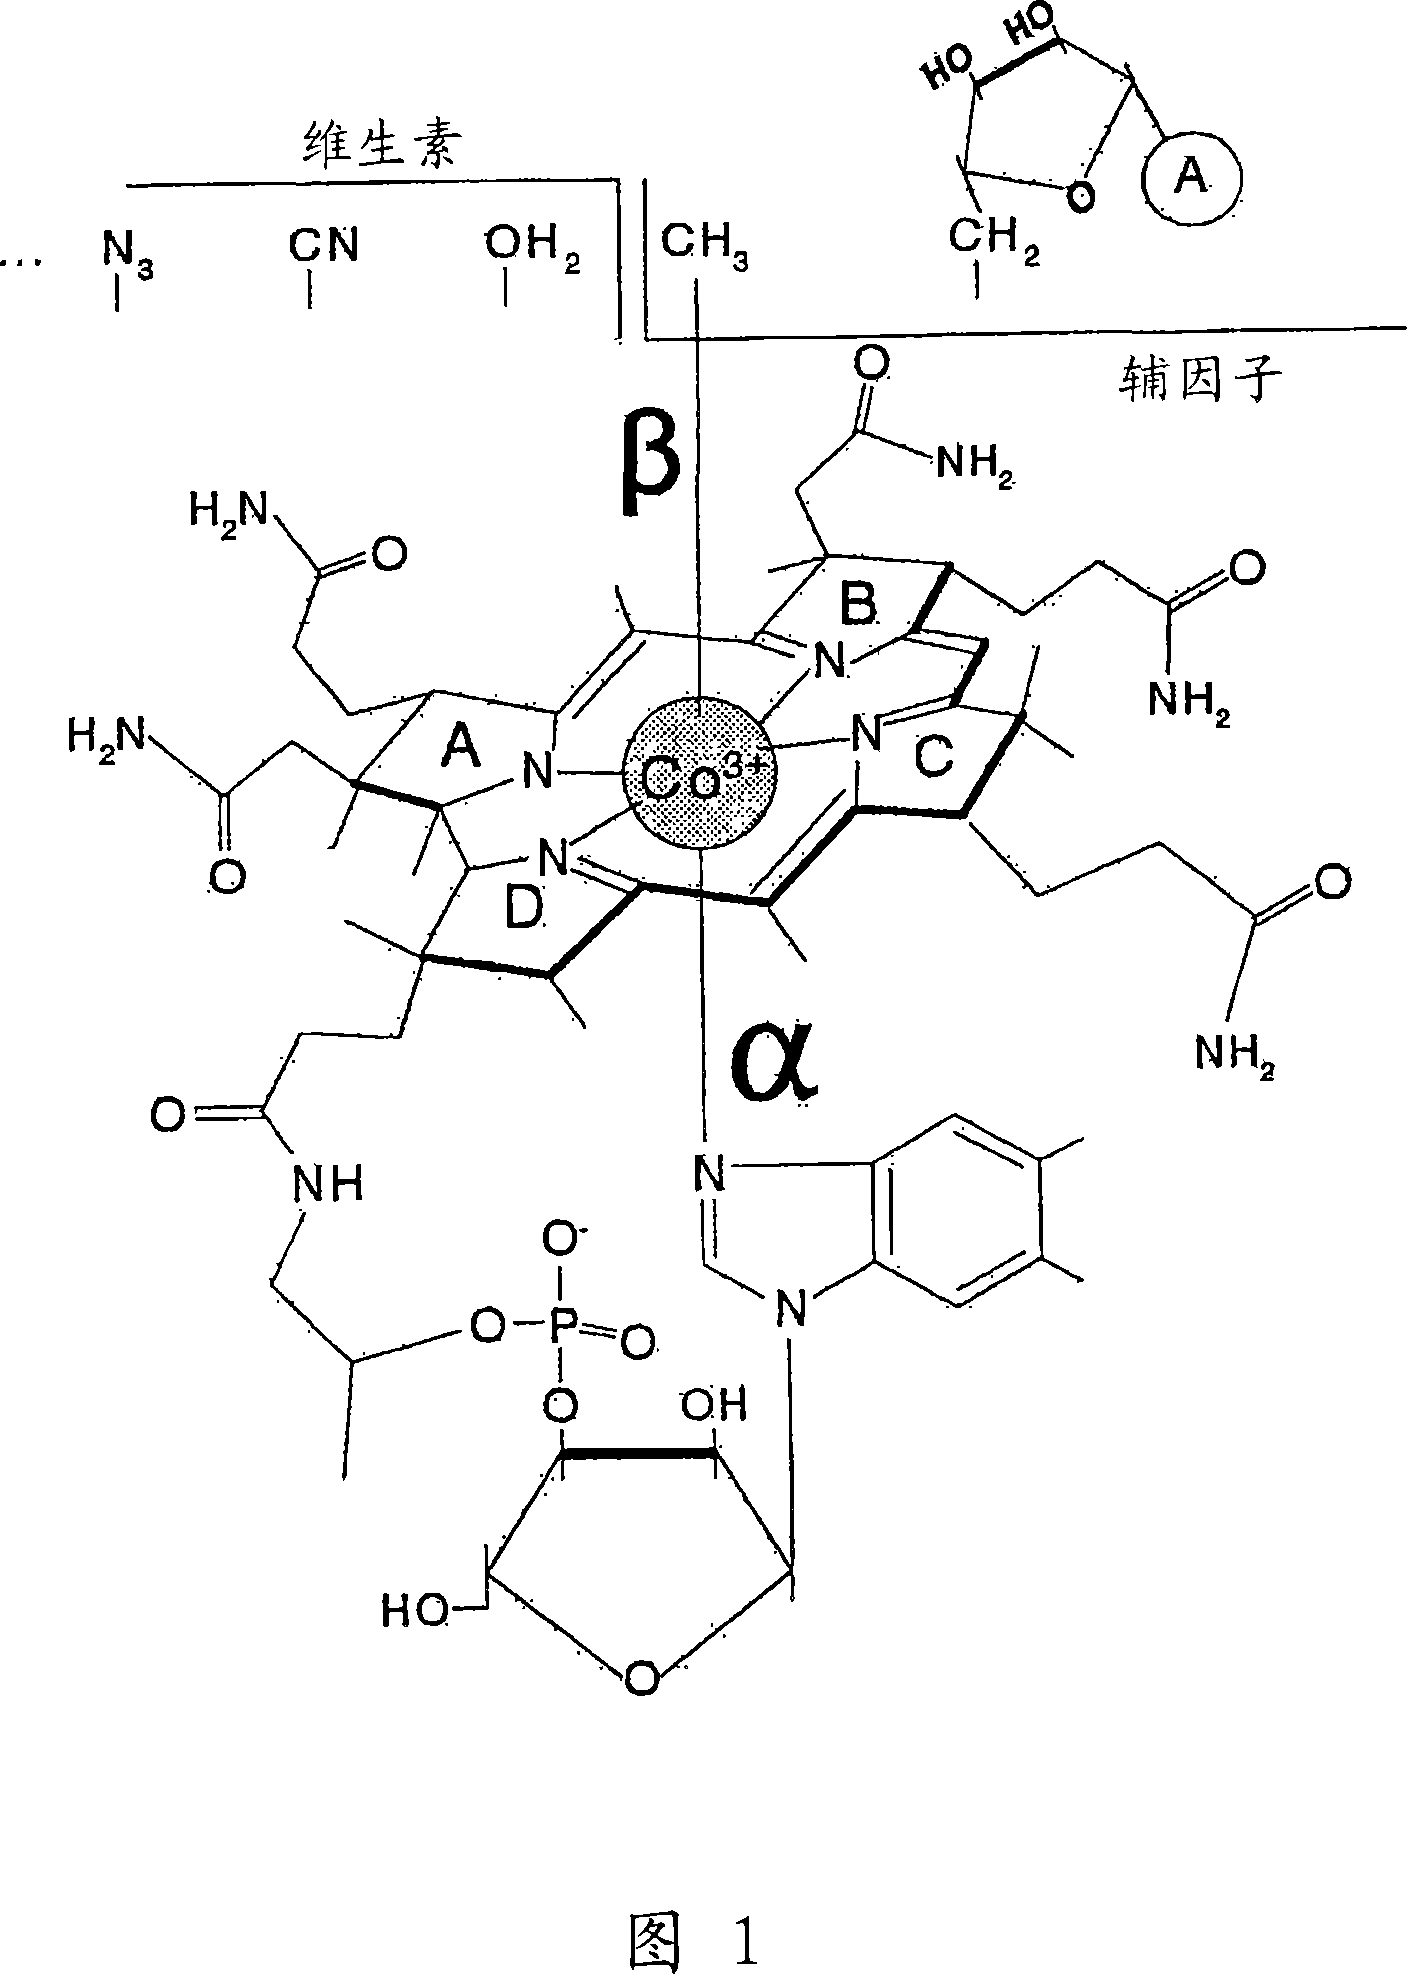 Methods for purifying corrin-containing molecules